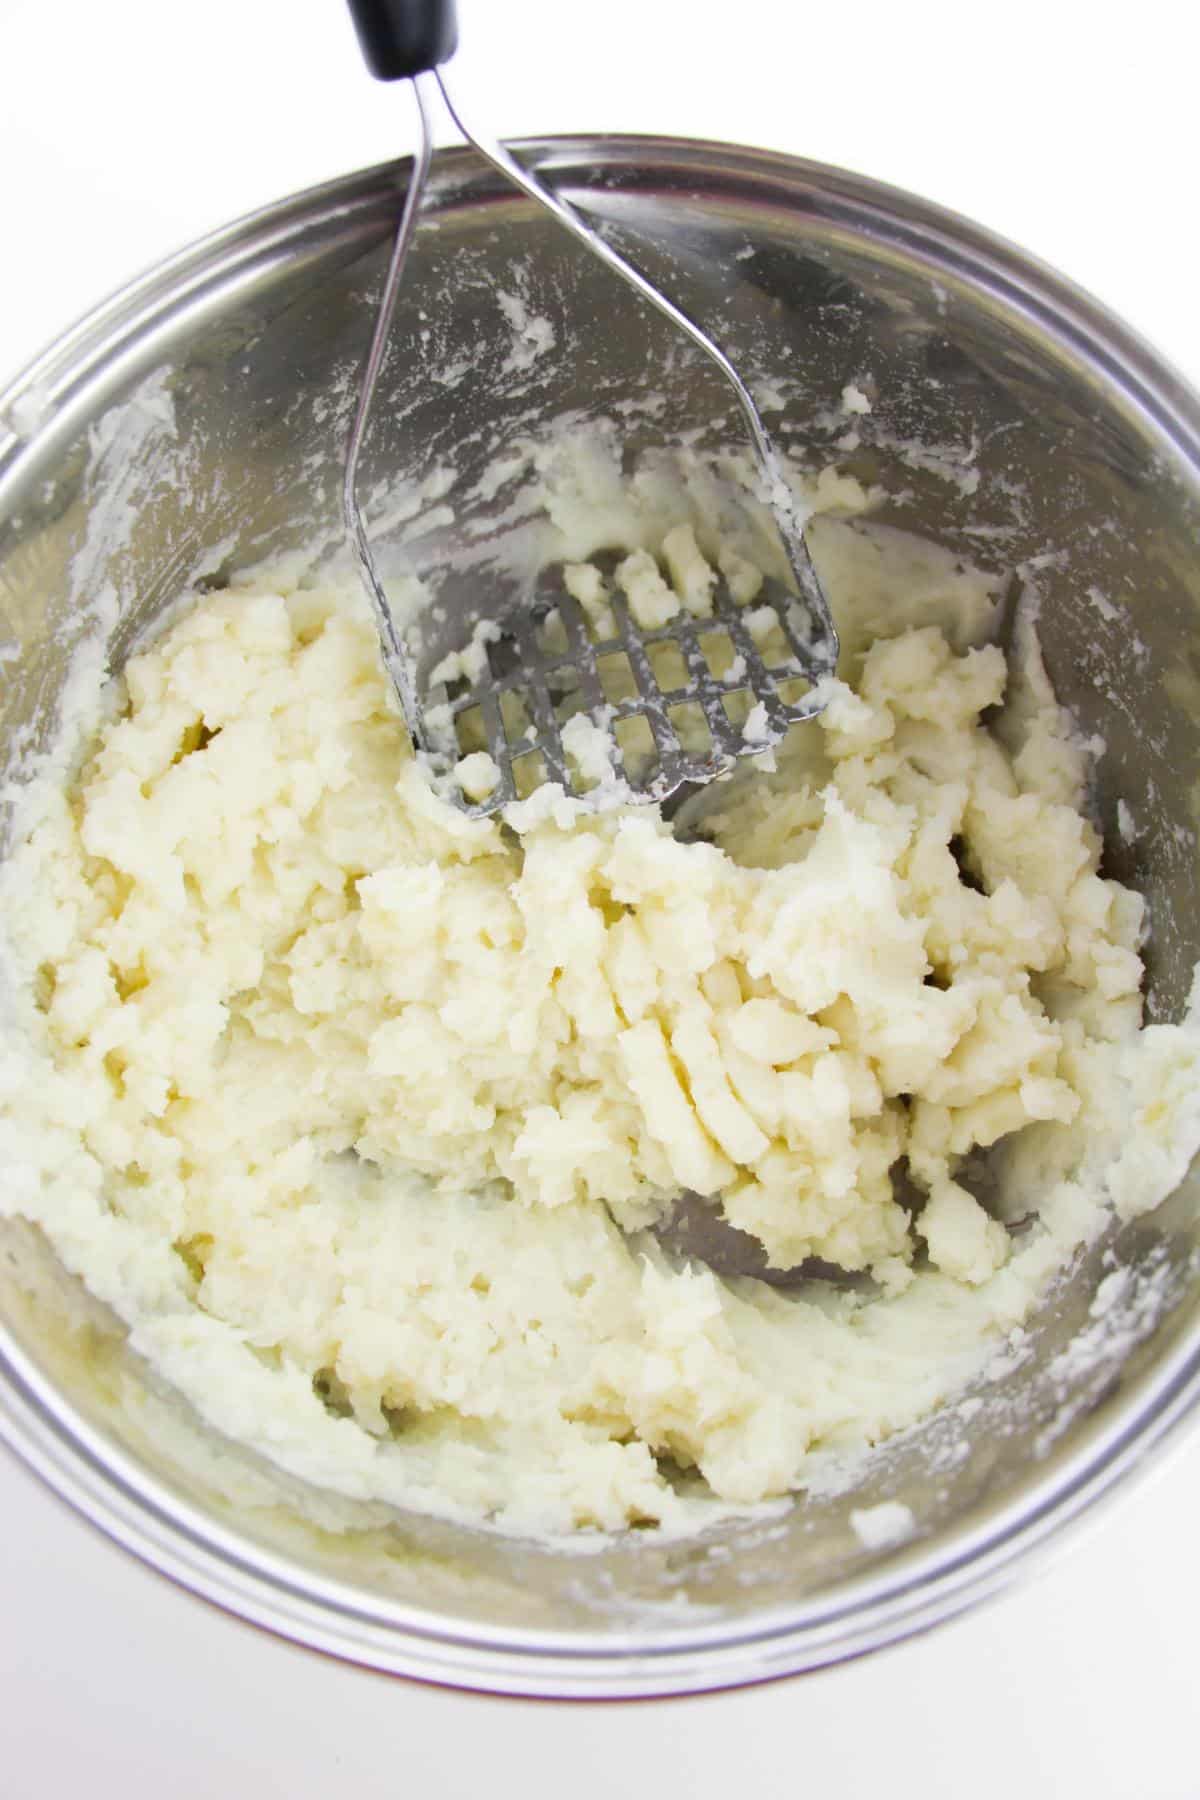 Cooked potatoes are being mashed using potato masher in a mixing bowl.